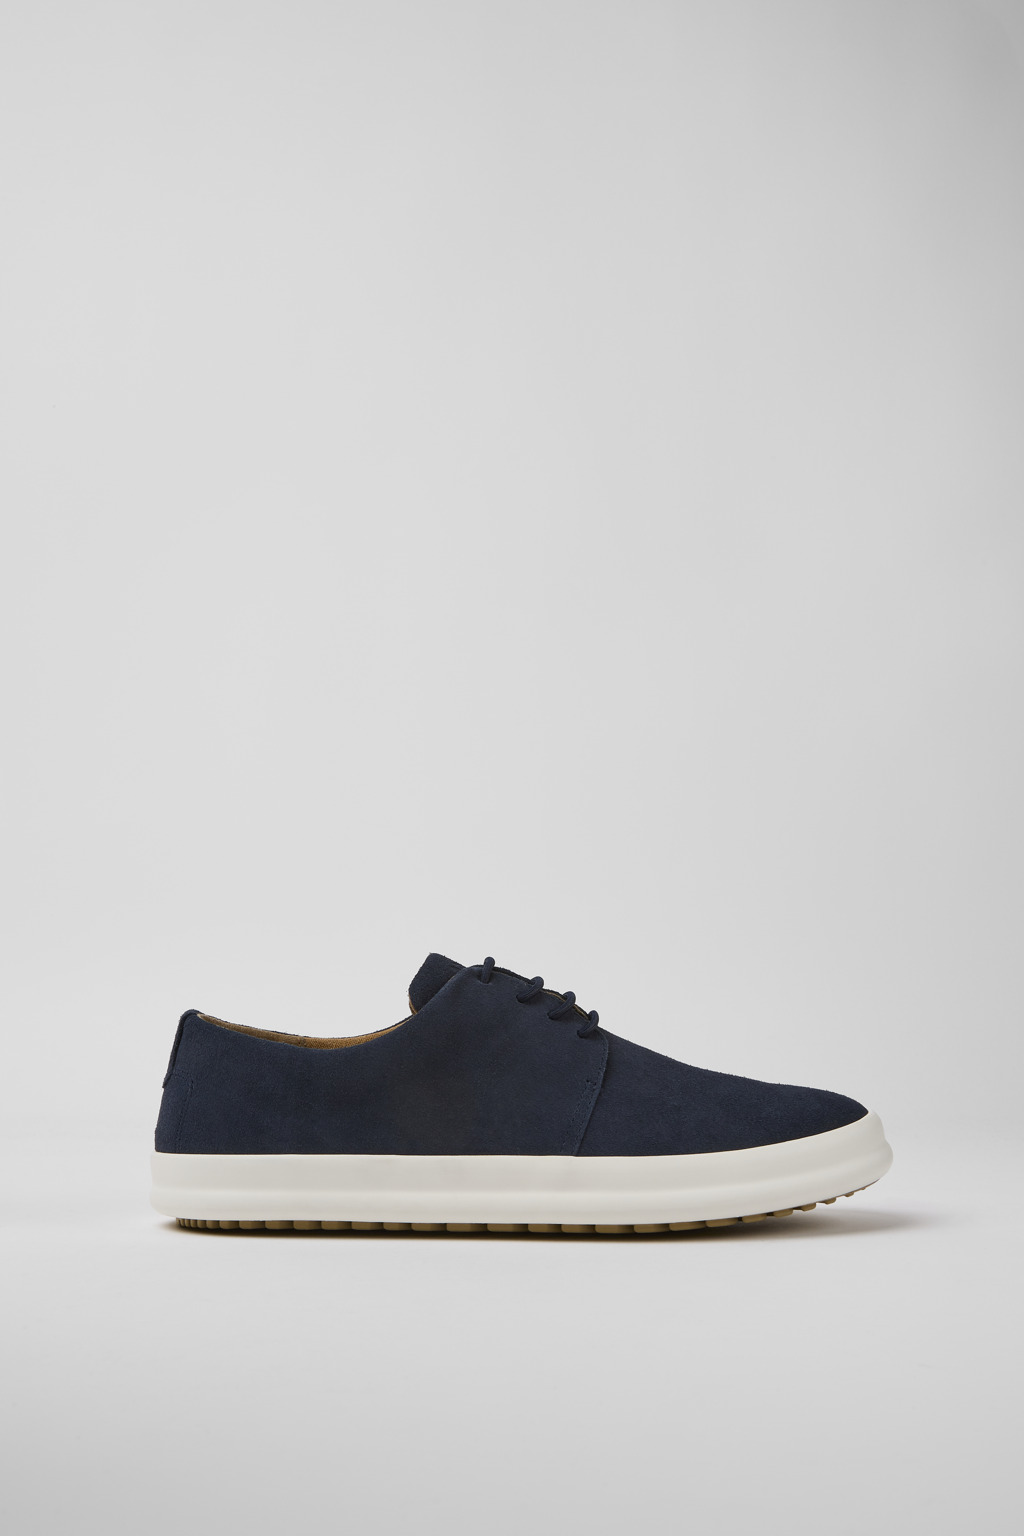 Chasis Blue Sneakers for Men - Spring/Summer collection - Camper 